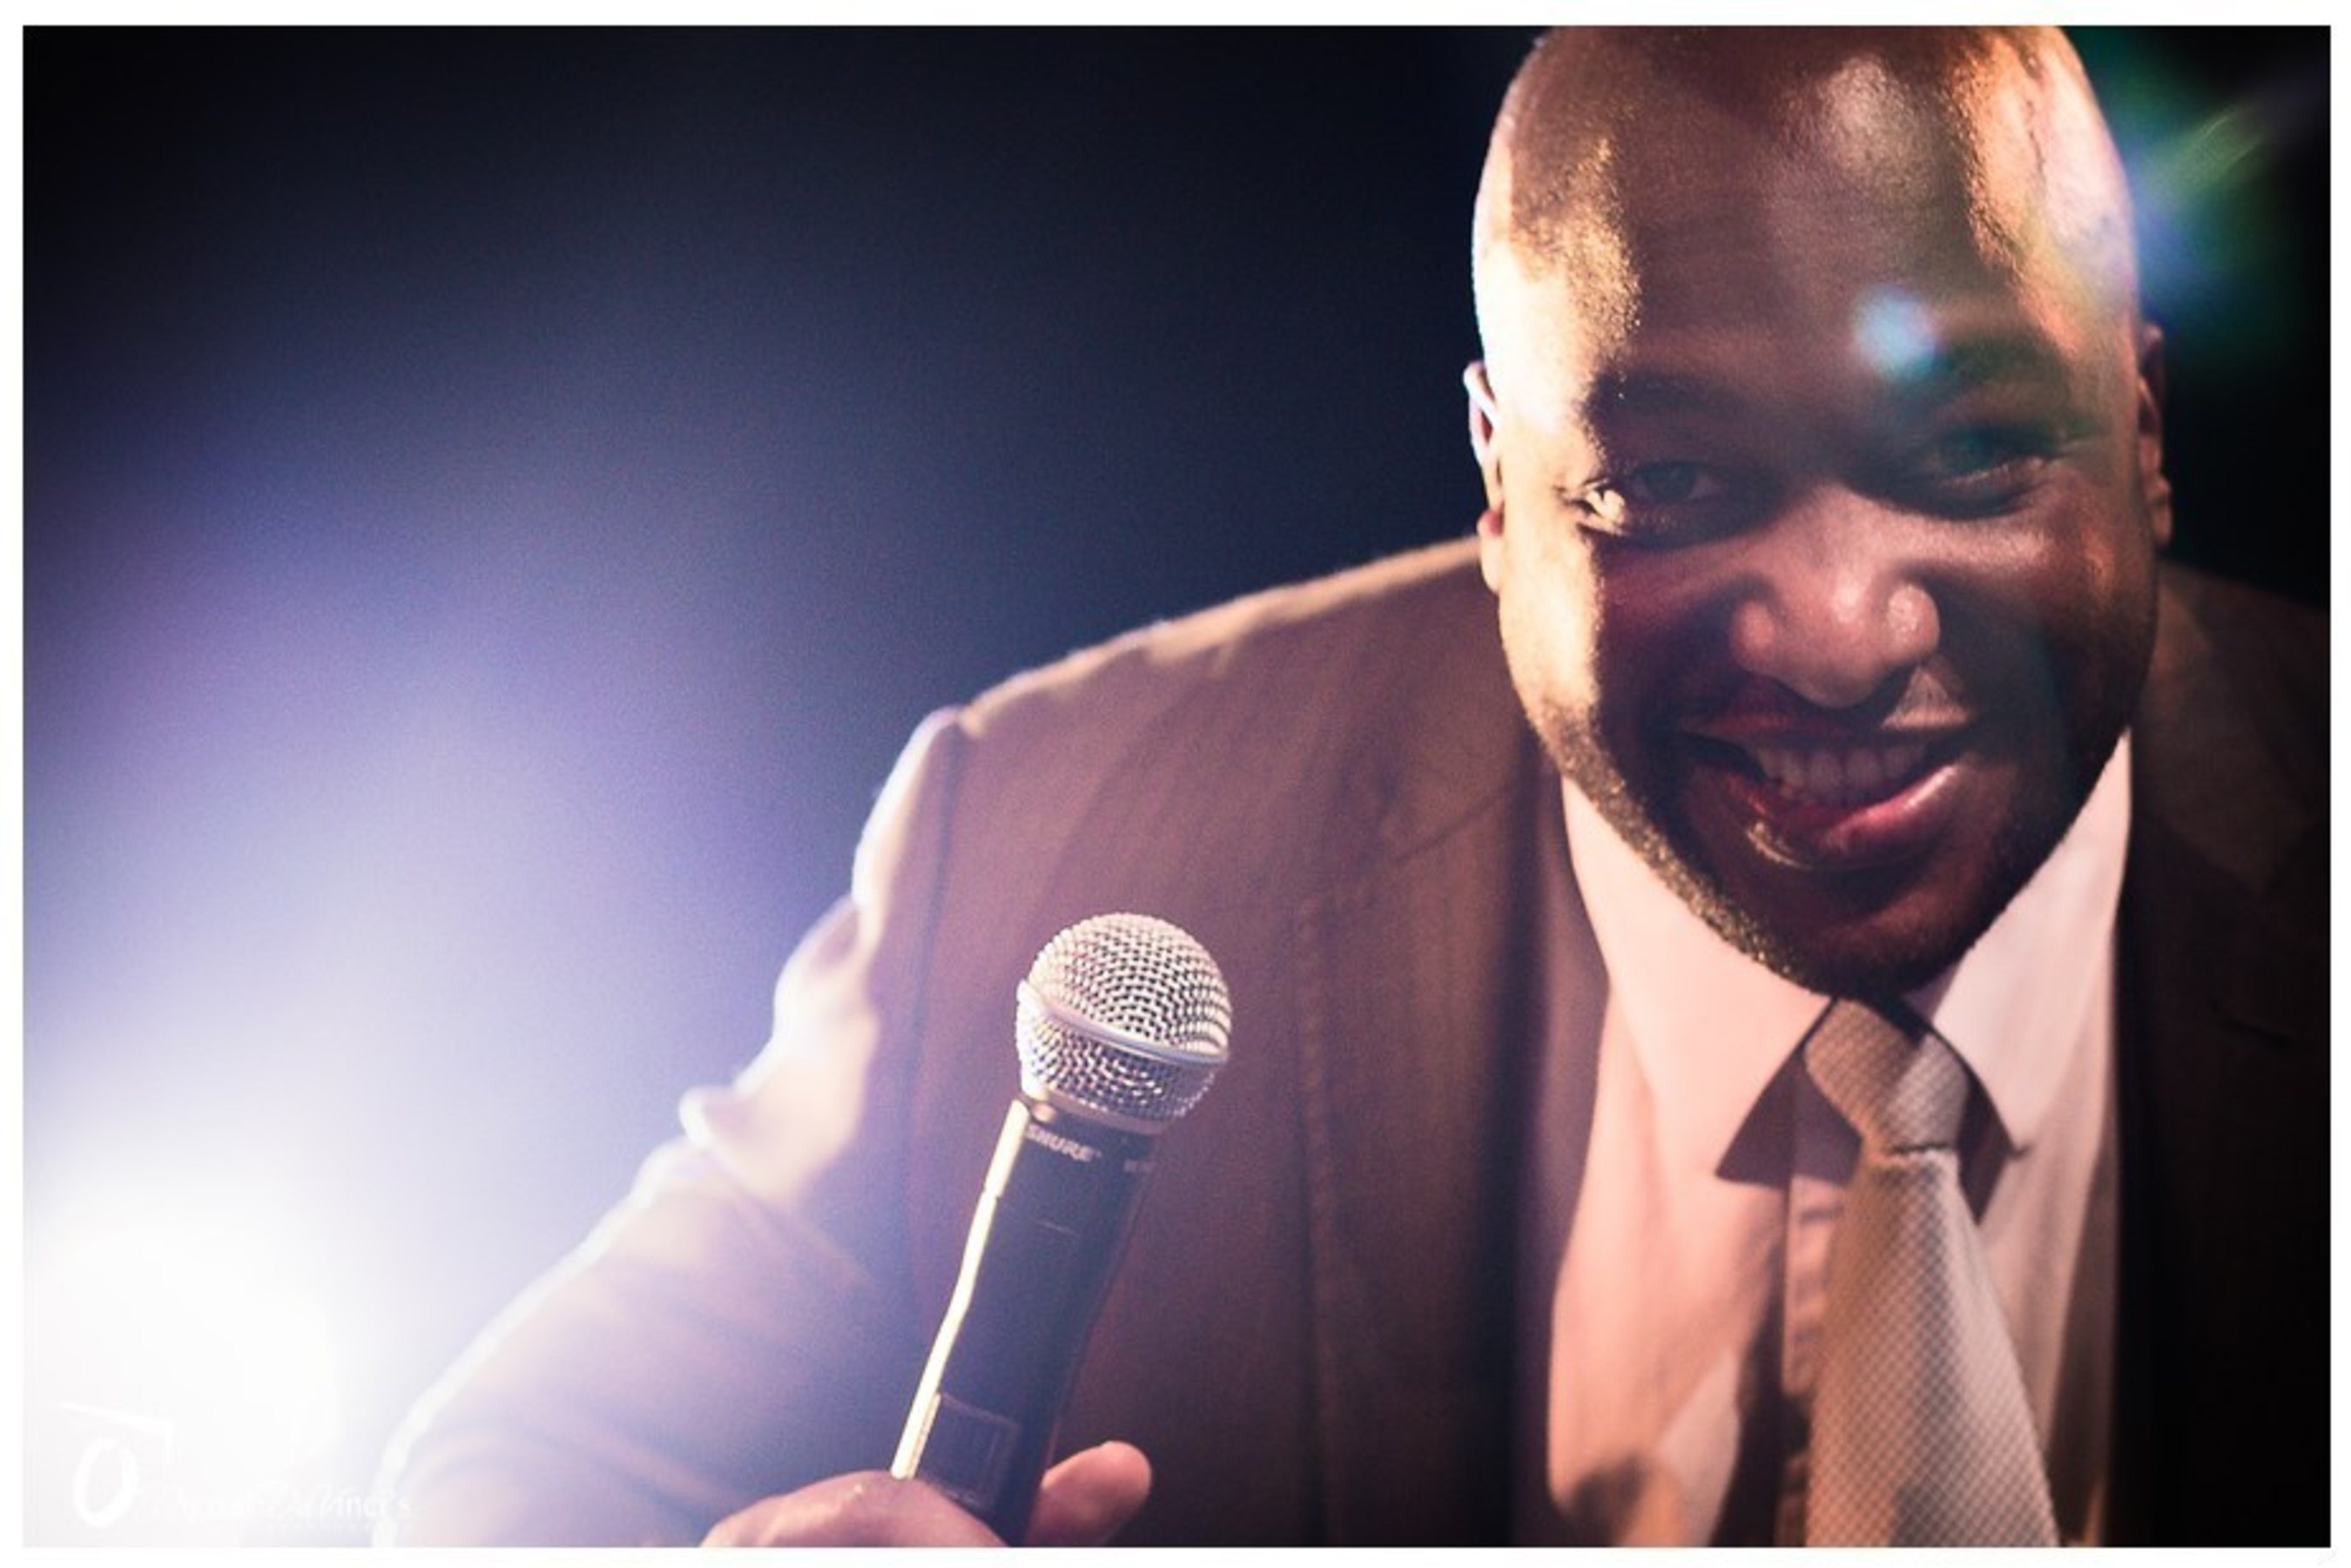 Tanzanian-born comedian Ed Blaze and Friends launch a major U.S. tour on Friday, Feb. 13th and Valentine's Day at the Hilton Boston/Woburn. This performance will benefit the Make-A-Wish Foundation. (PRNewsFoto/Metro Comedy Entertainment)